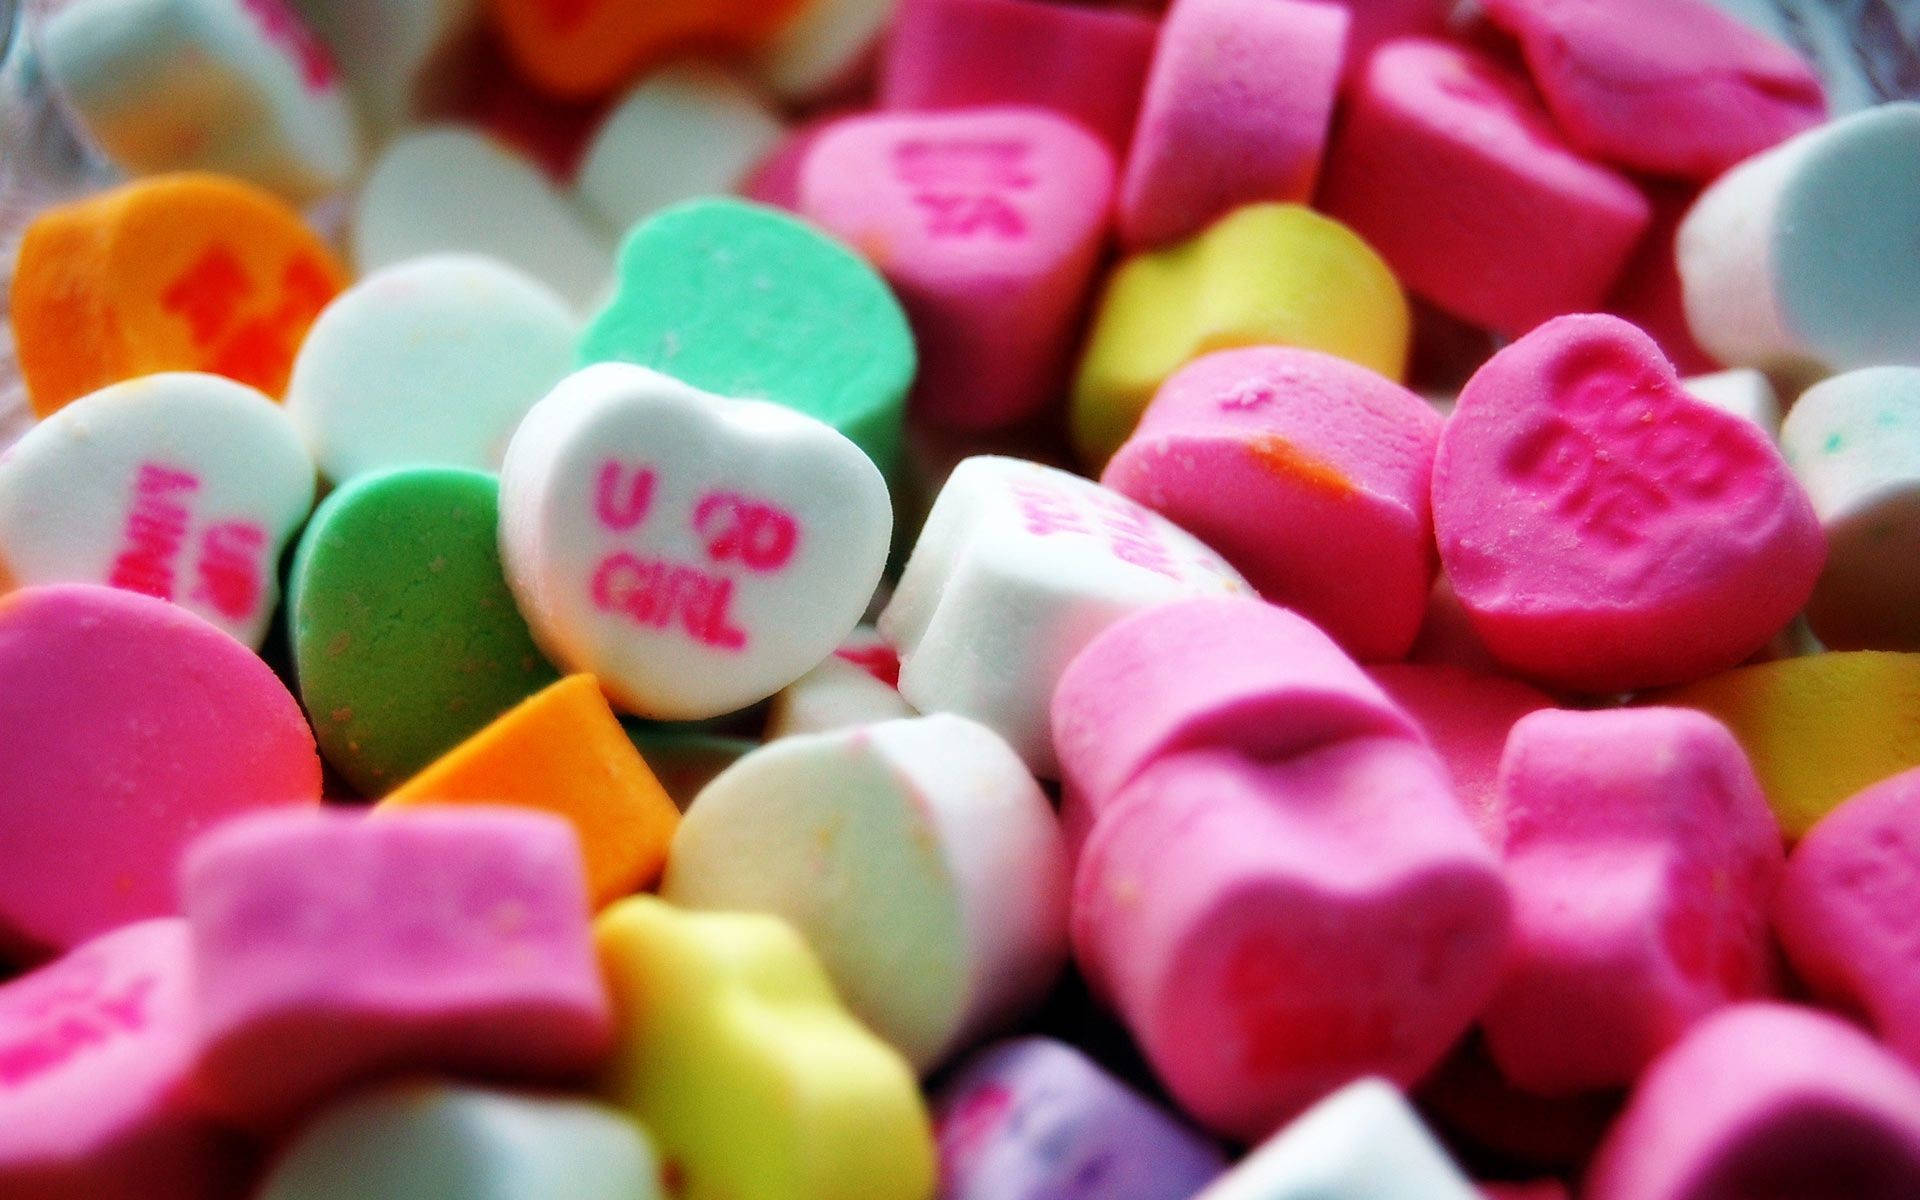 Sweet Heart-shaped Candies With Texts Background